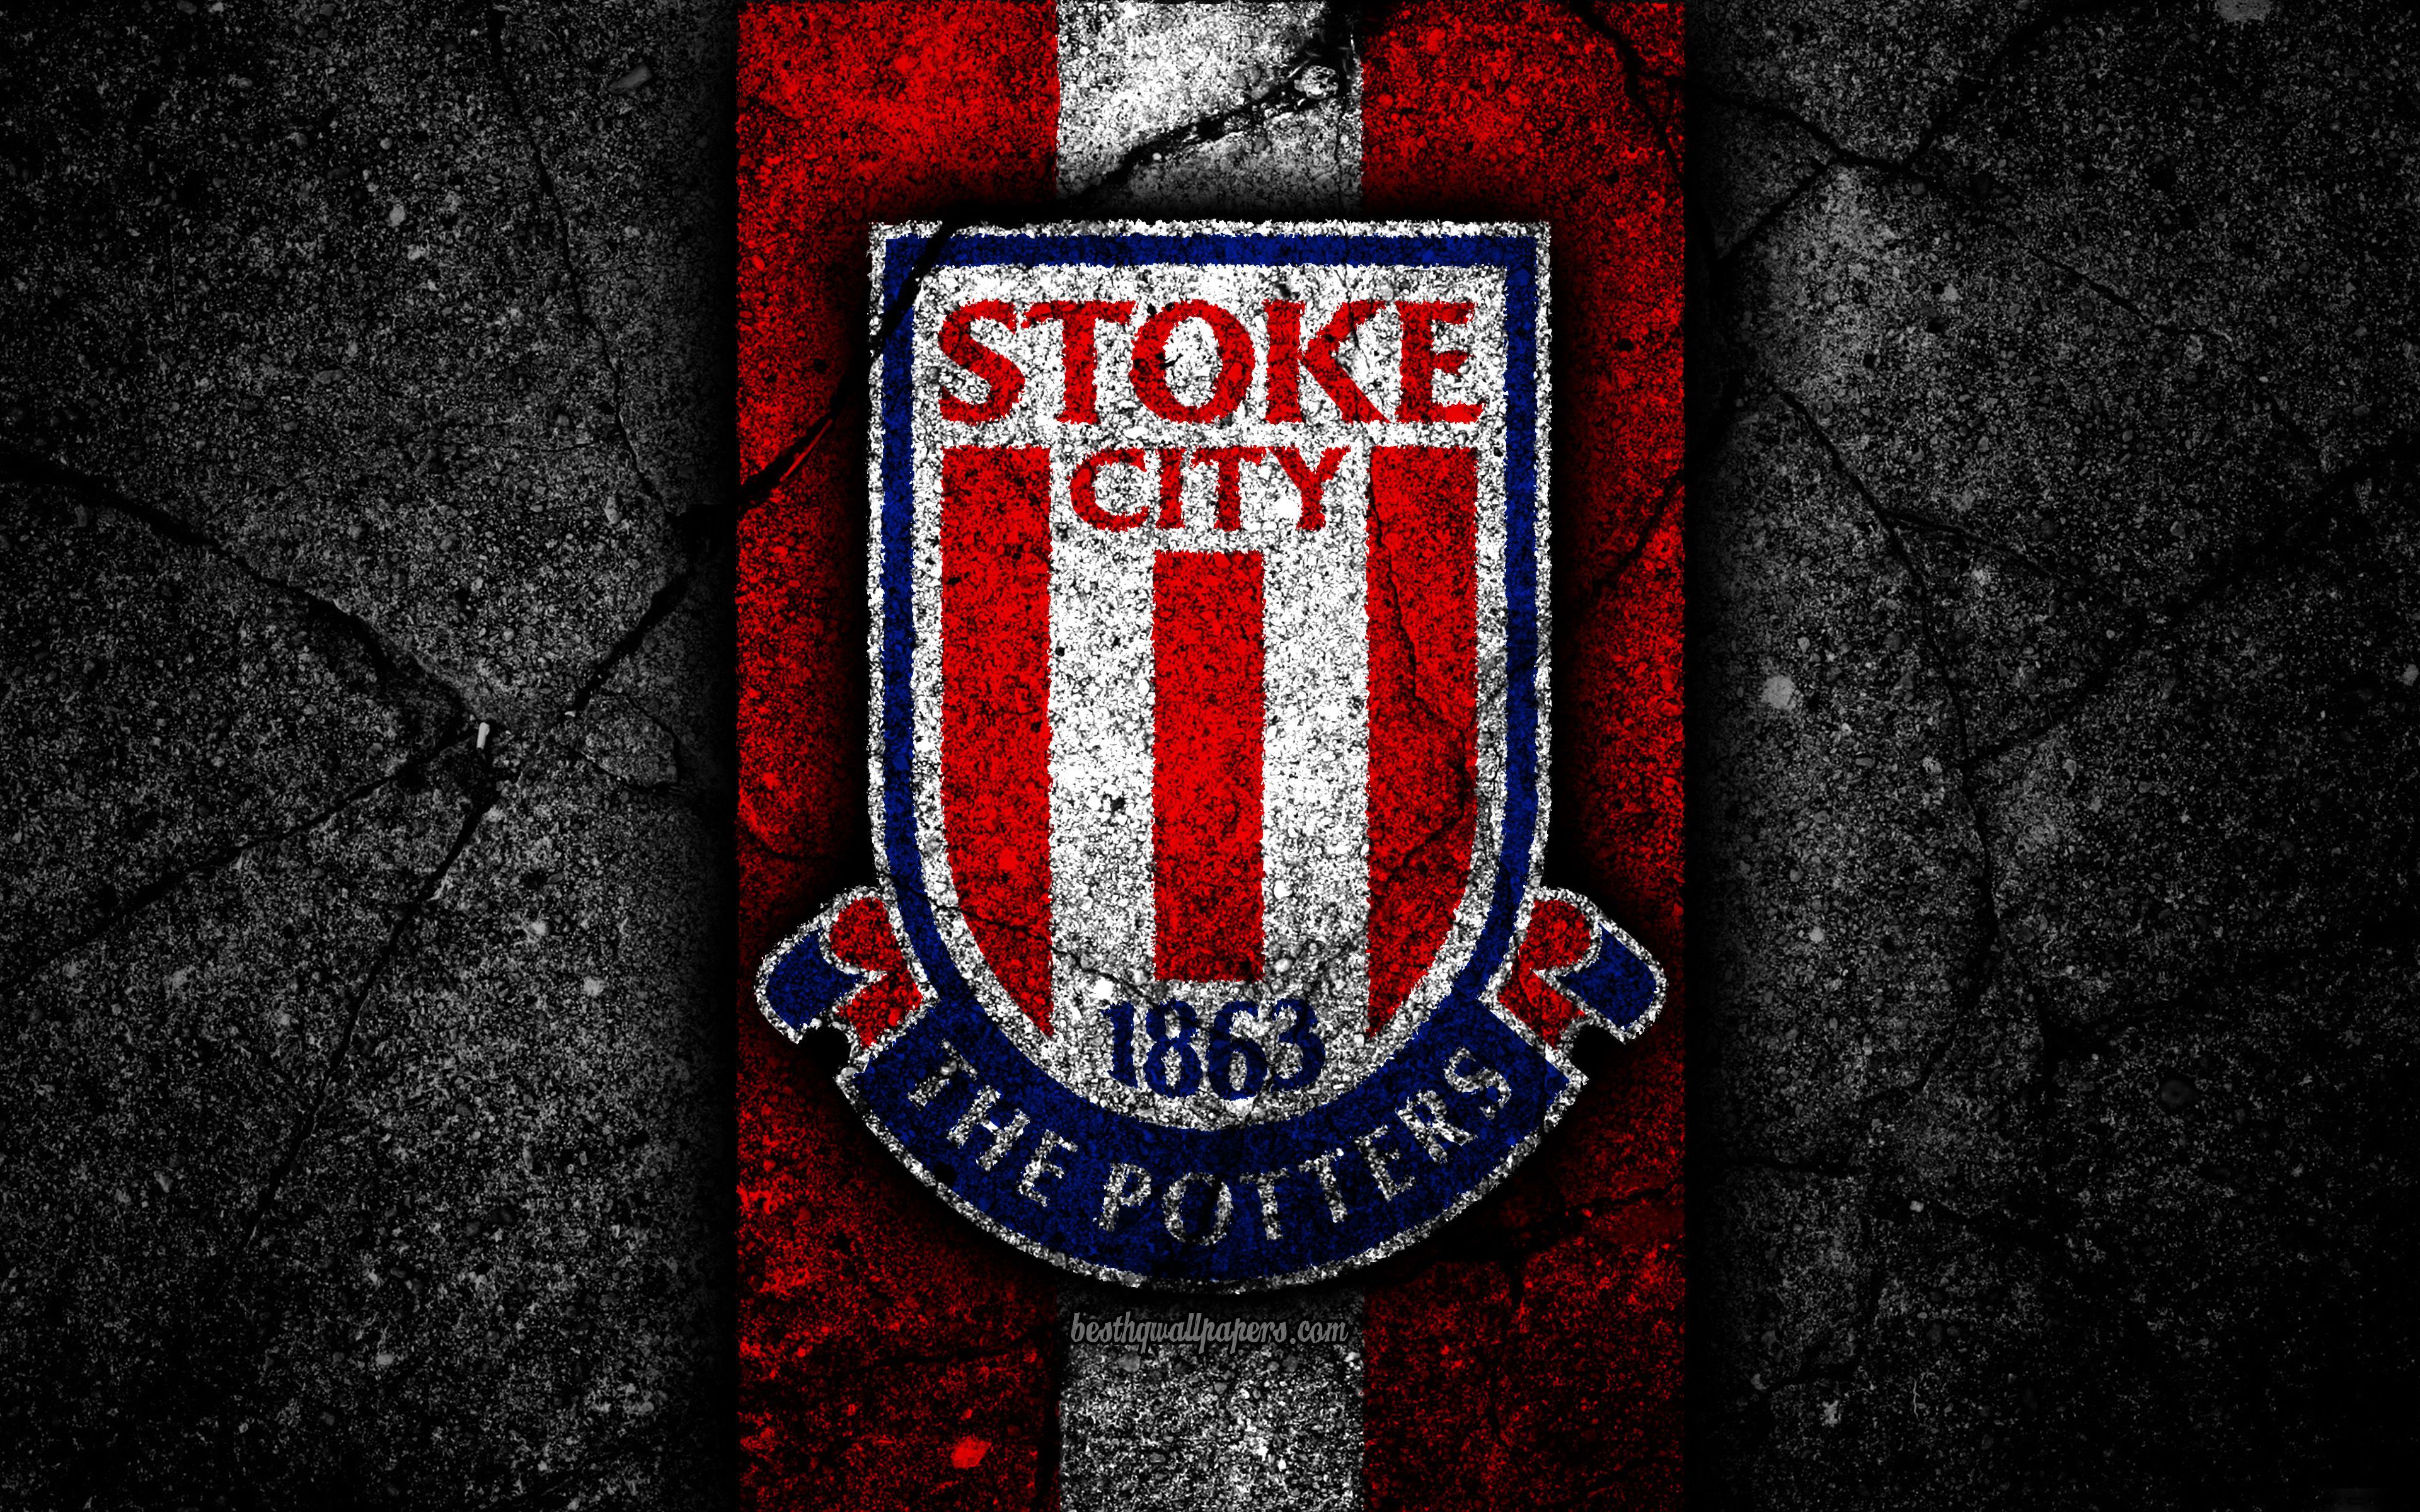 Stoke City F.C. Wallpapers